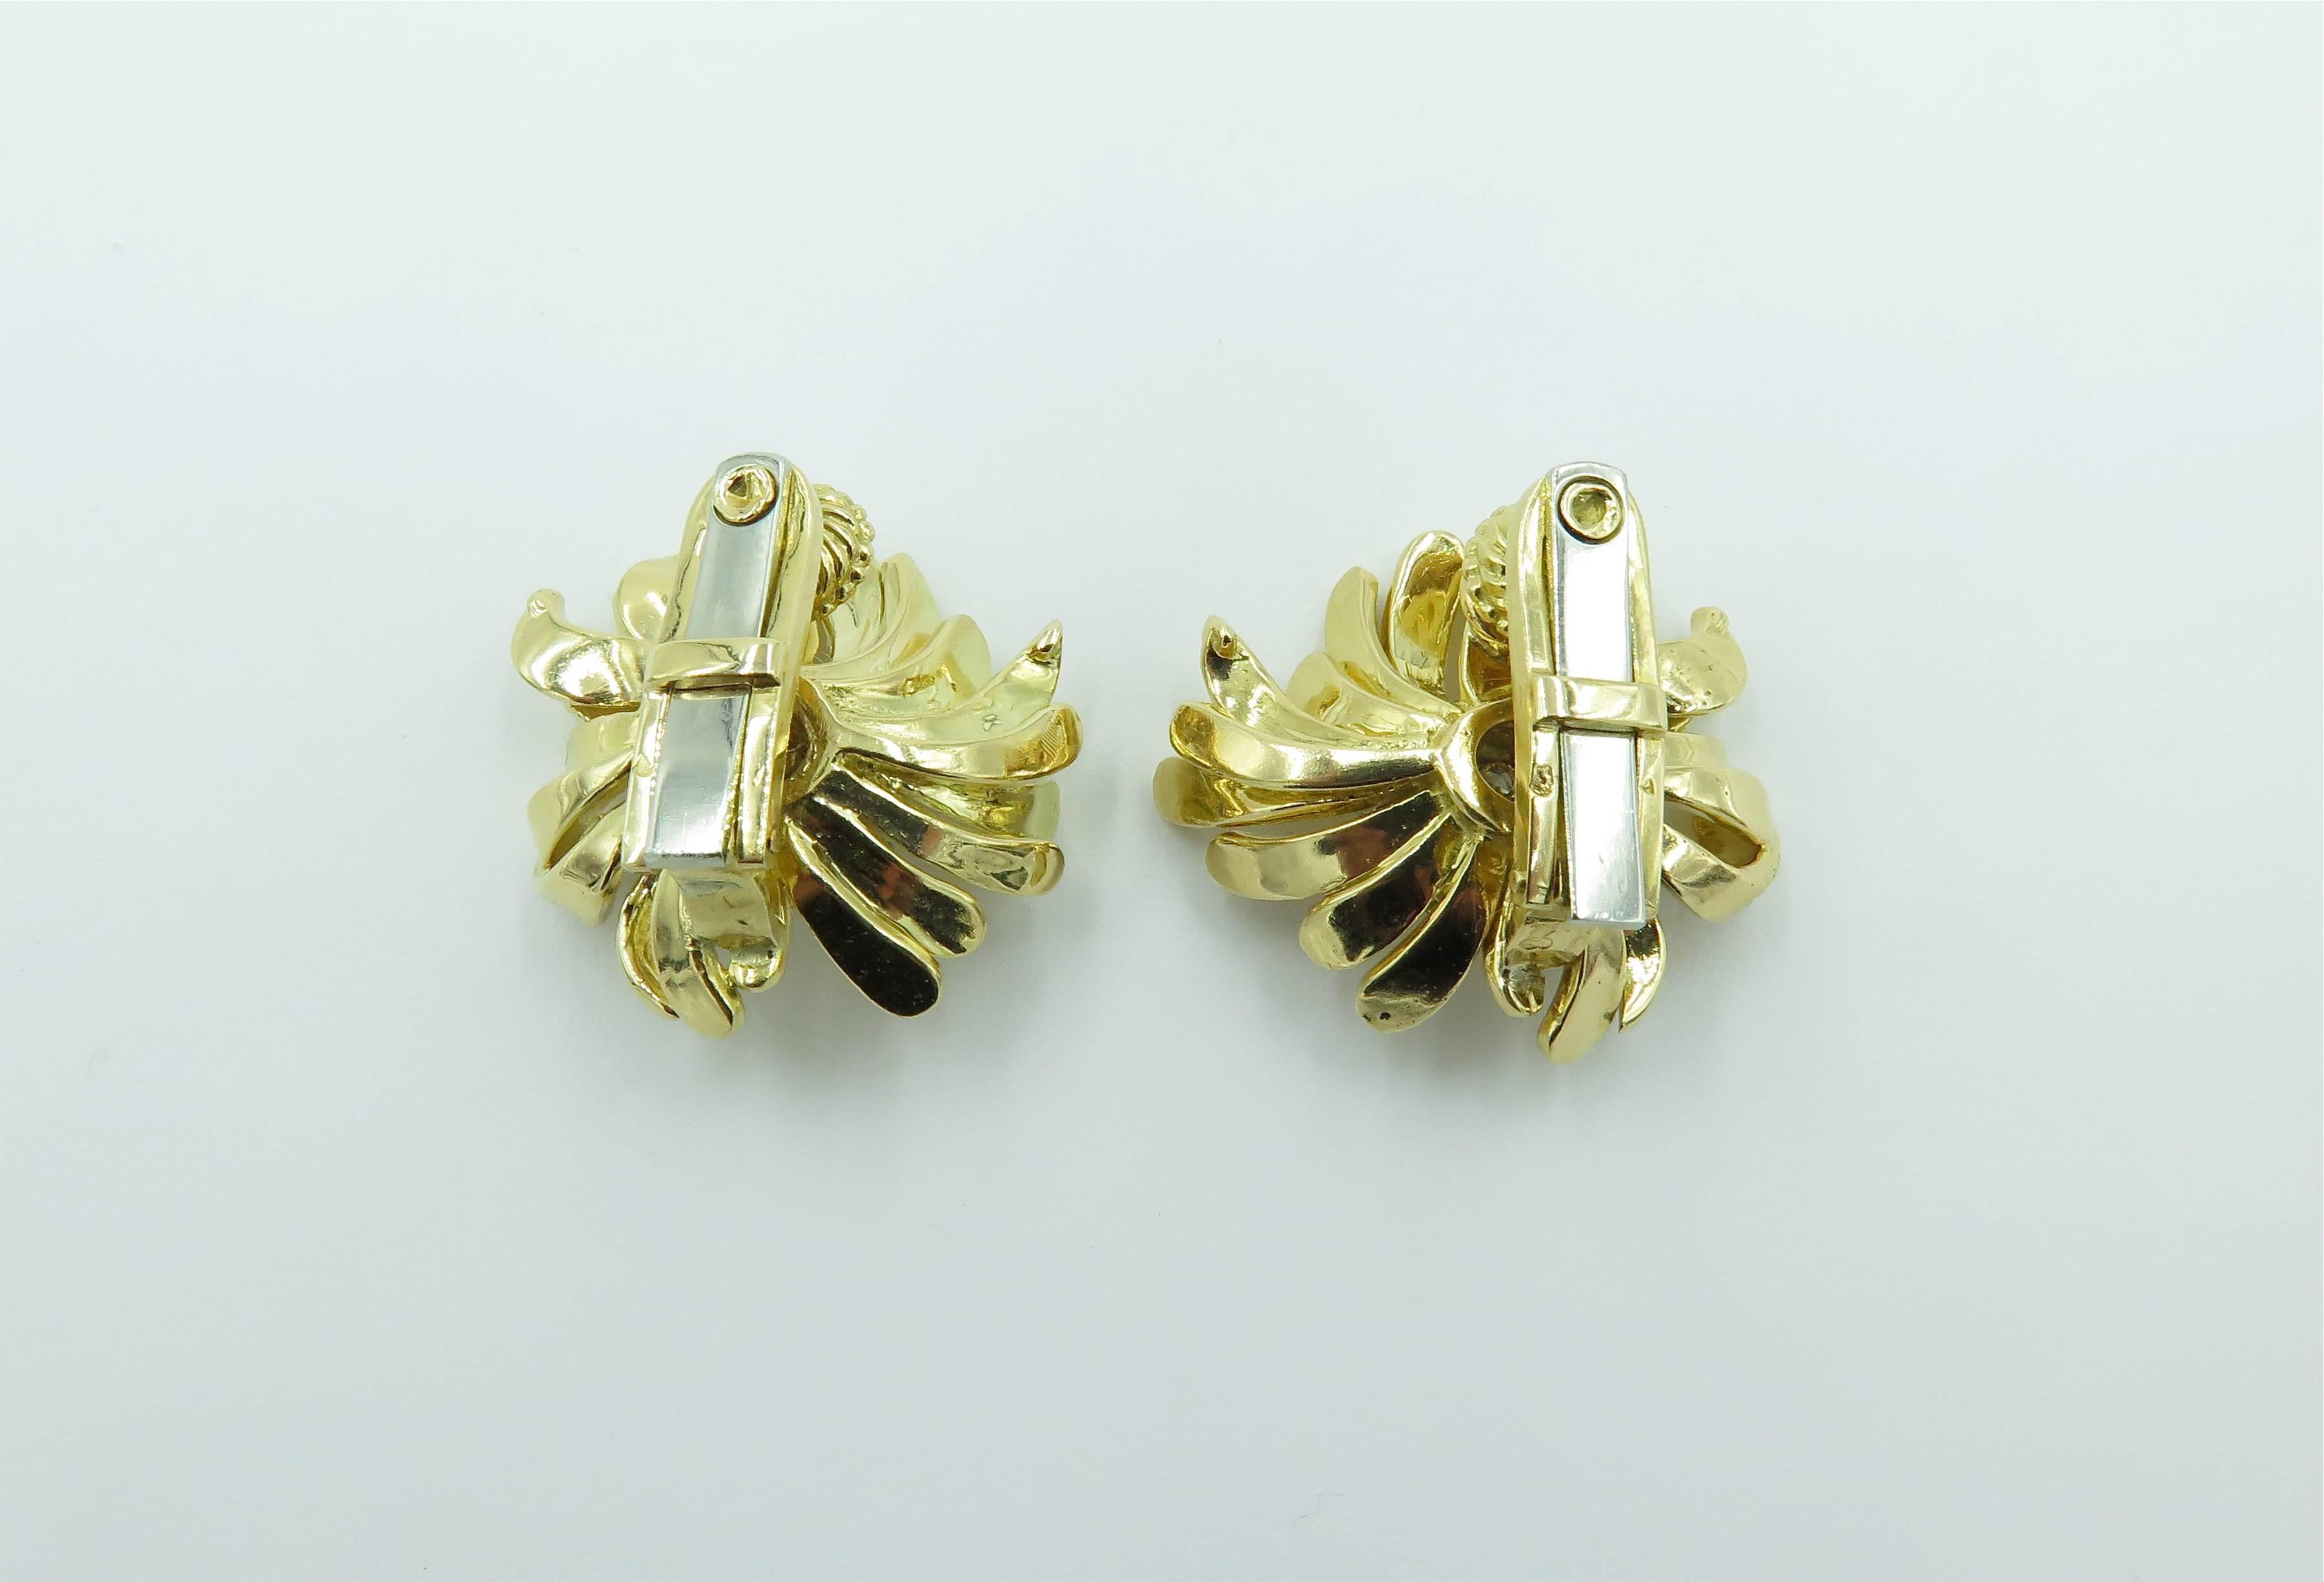 A pair of 18 karat yellow gold and diamond flower earrings. French. Circa 1960. Designed as a flowered, with textured gold undulating petals, centering a cluster of circular cut diamonds. Diamonds weigh approximately 1.40 carats. Diameter is